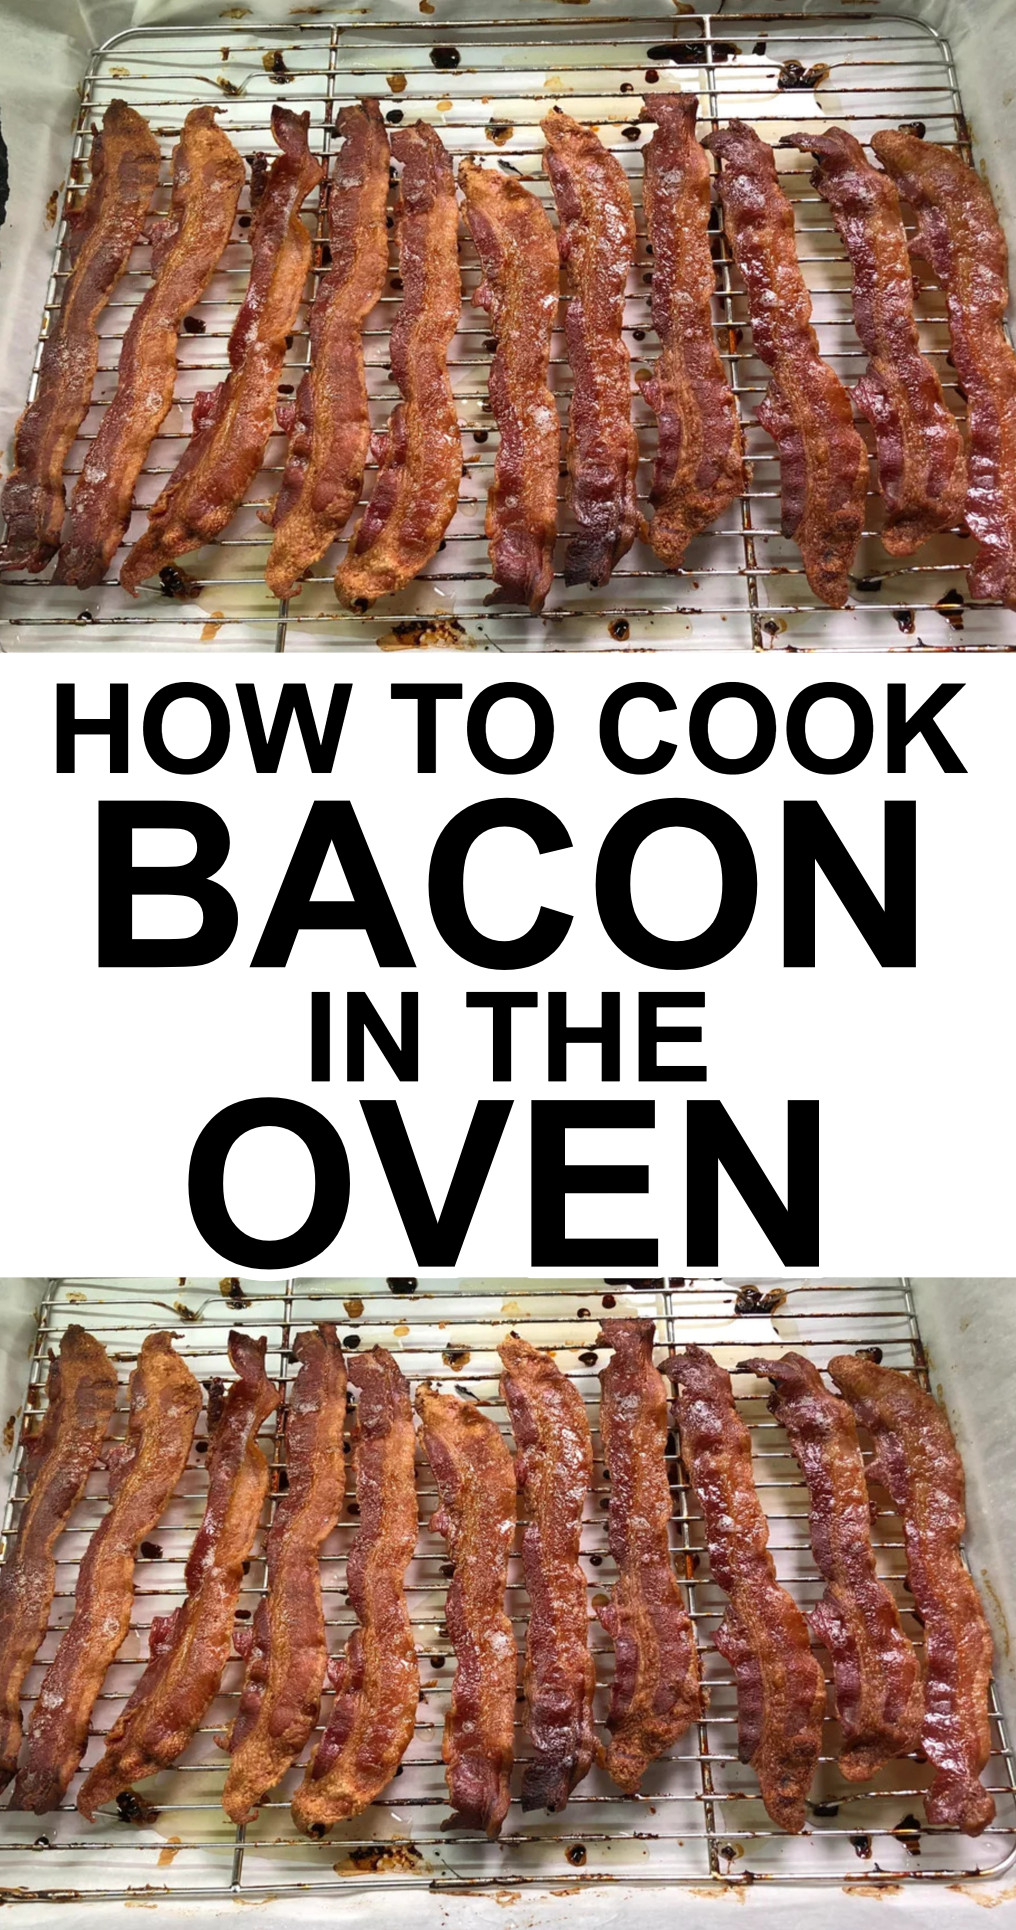 Baked Bacon - How To Cook Bacon In The Oven